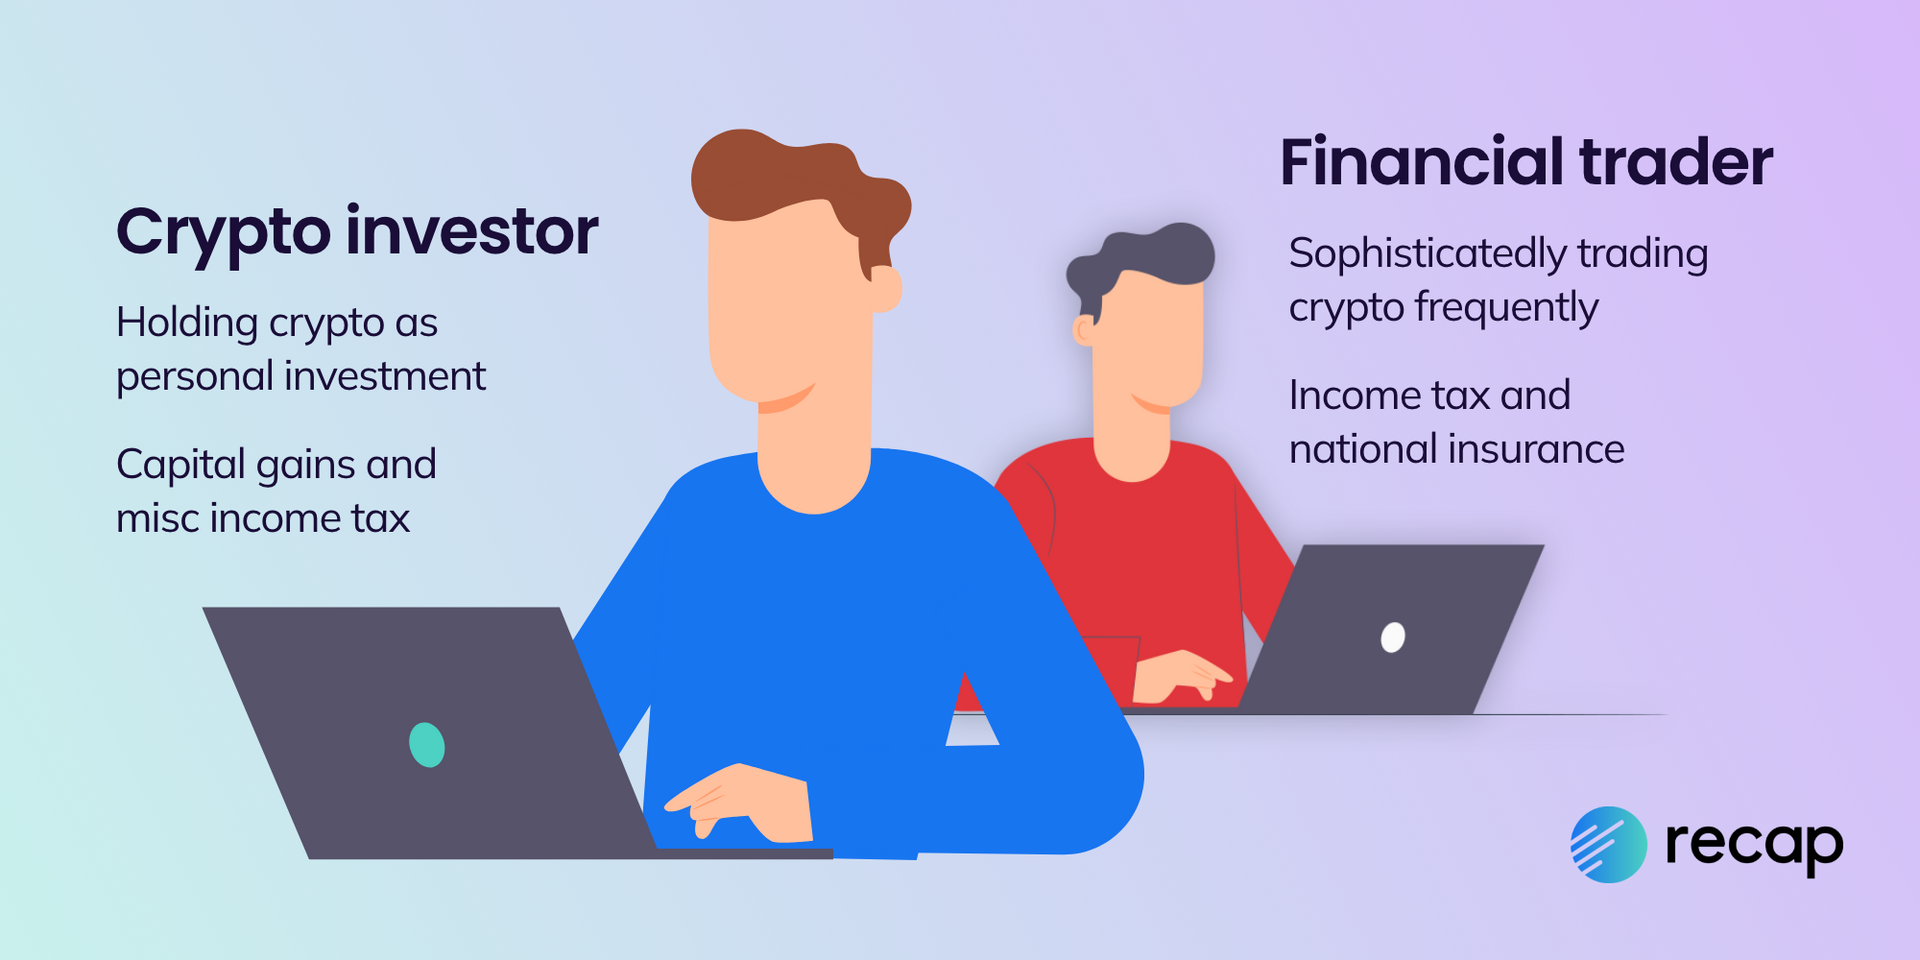 Infographic showing the traits and tax consequences for crypto investors and financial traders. 